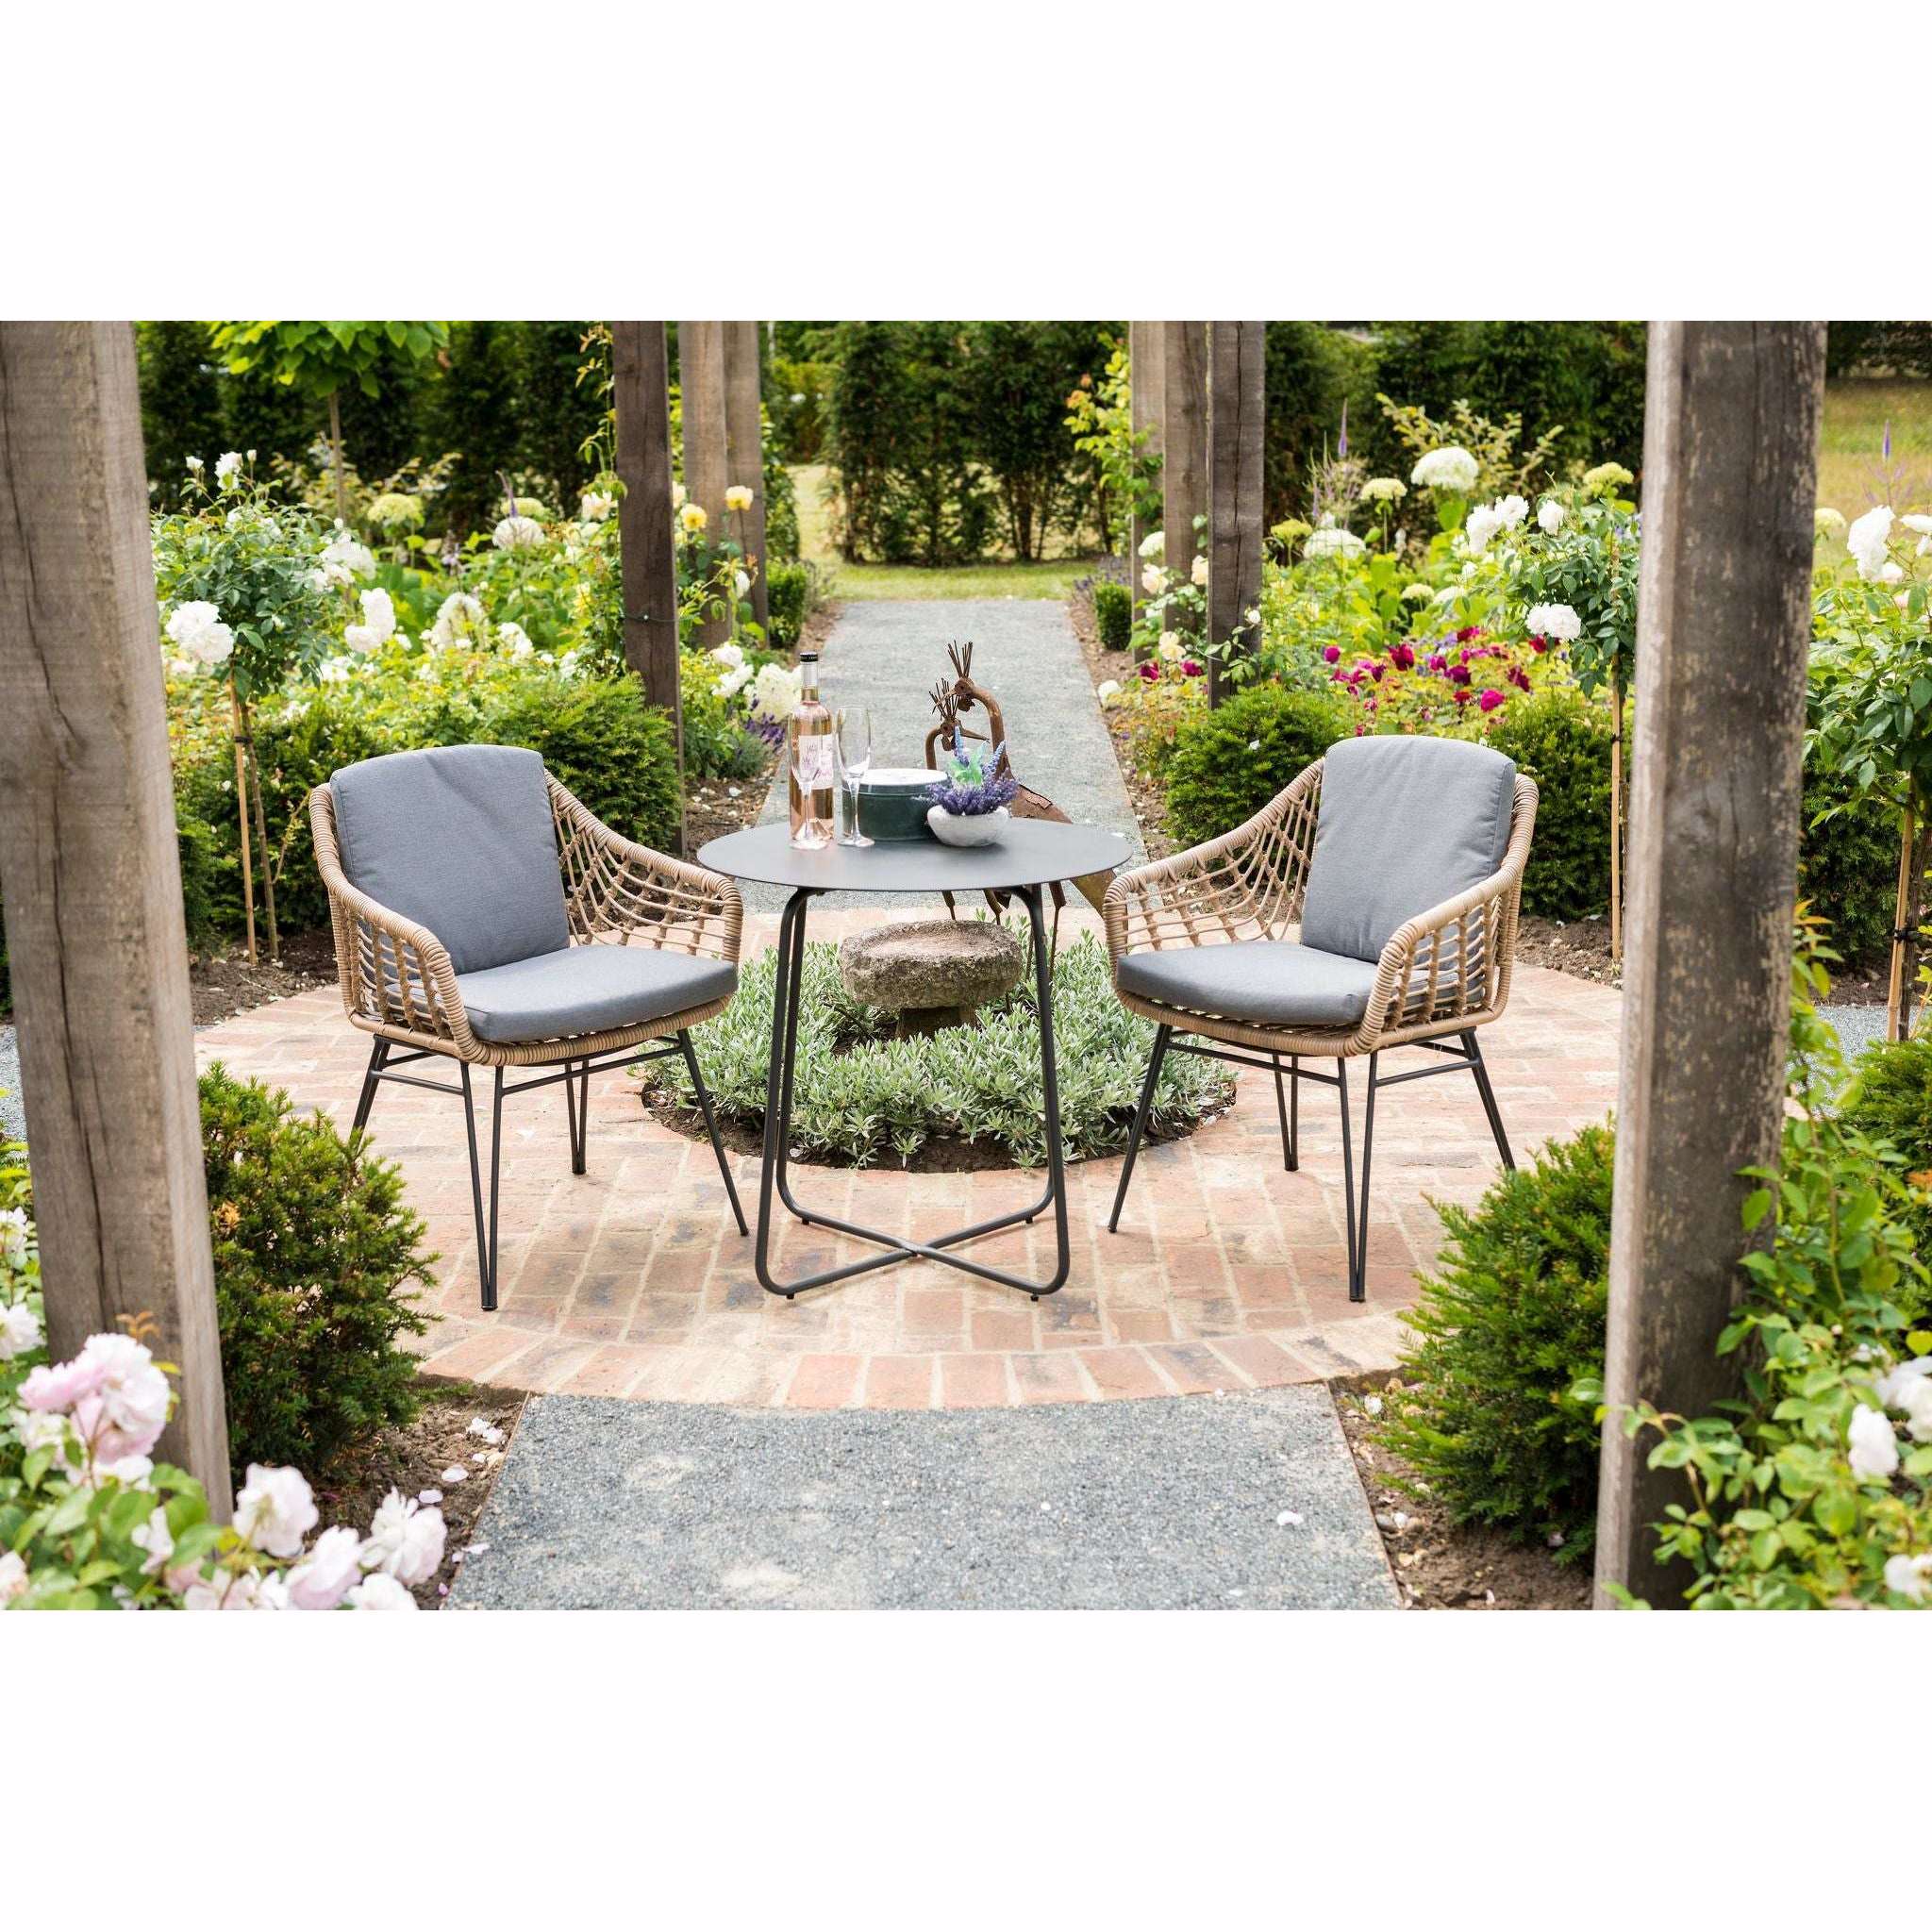 Exceptional Garden:4 Seasons Outdoor Cottage Bistro set with Dali table